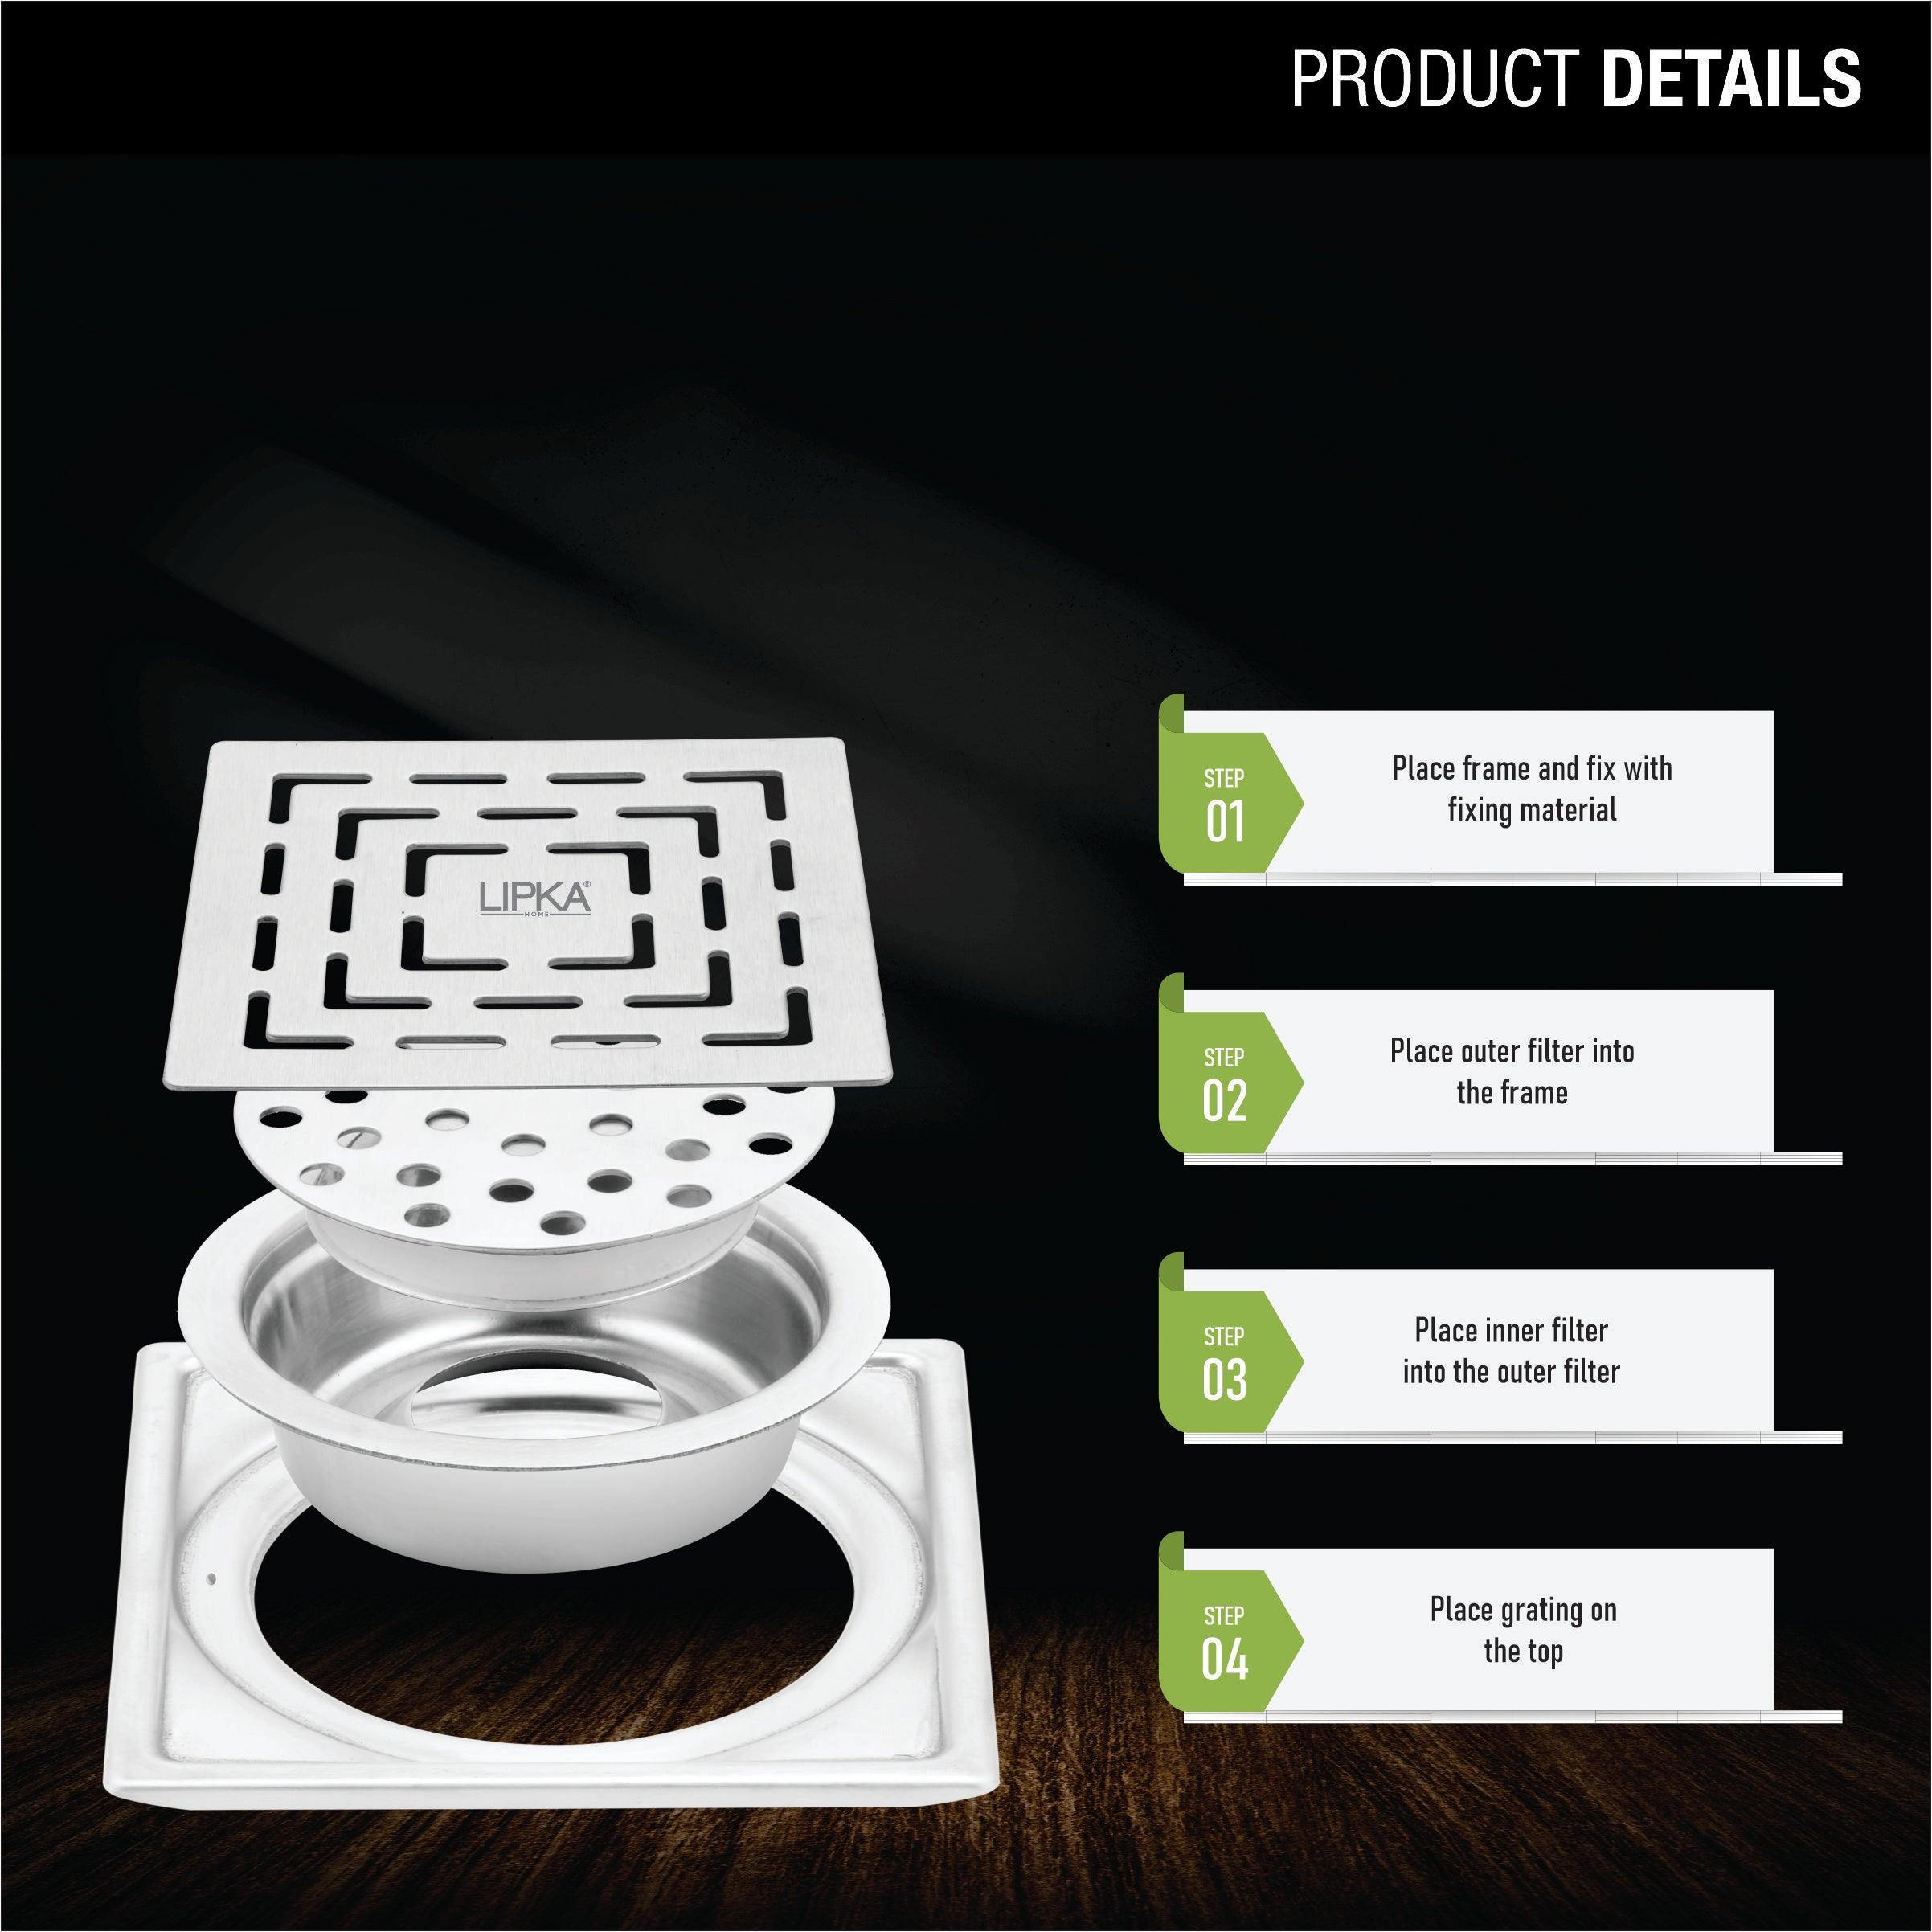 Orange Exclusive Square Floor Drain (6 x 6 Inches) with Cockroach Trap product details